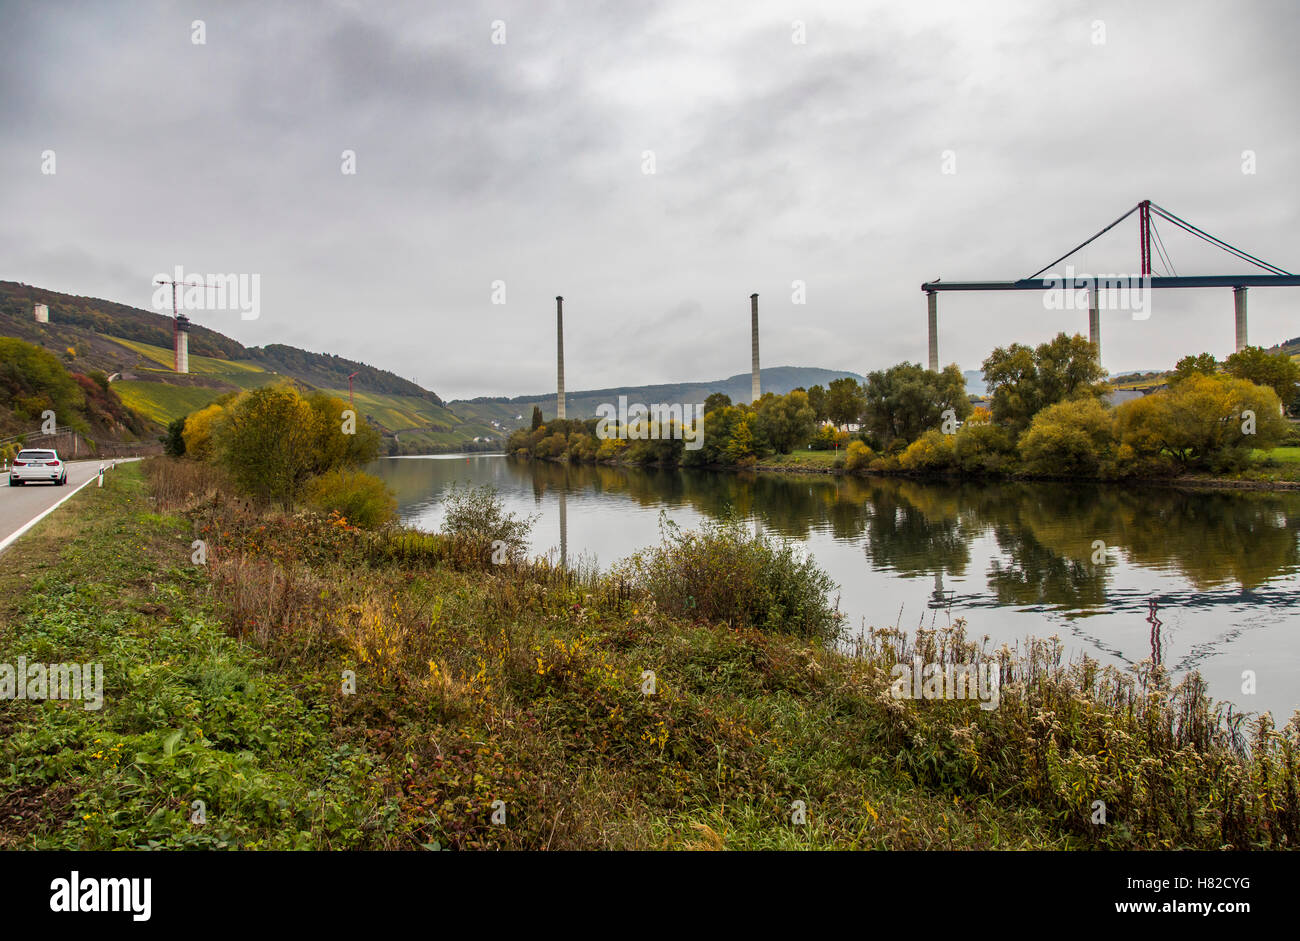 Construction site of the Moselle valley bridge, a street bridge over the Moselle river near the village of Zeltingen-Rachtig, Stock Photo